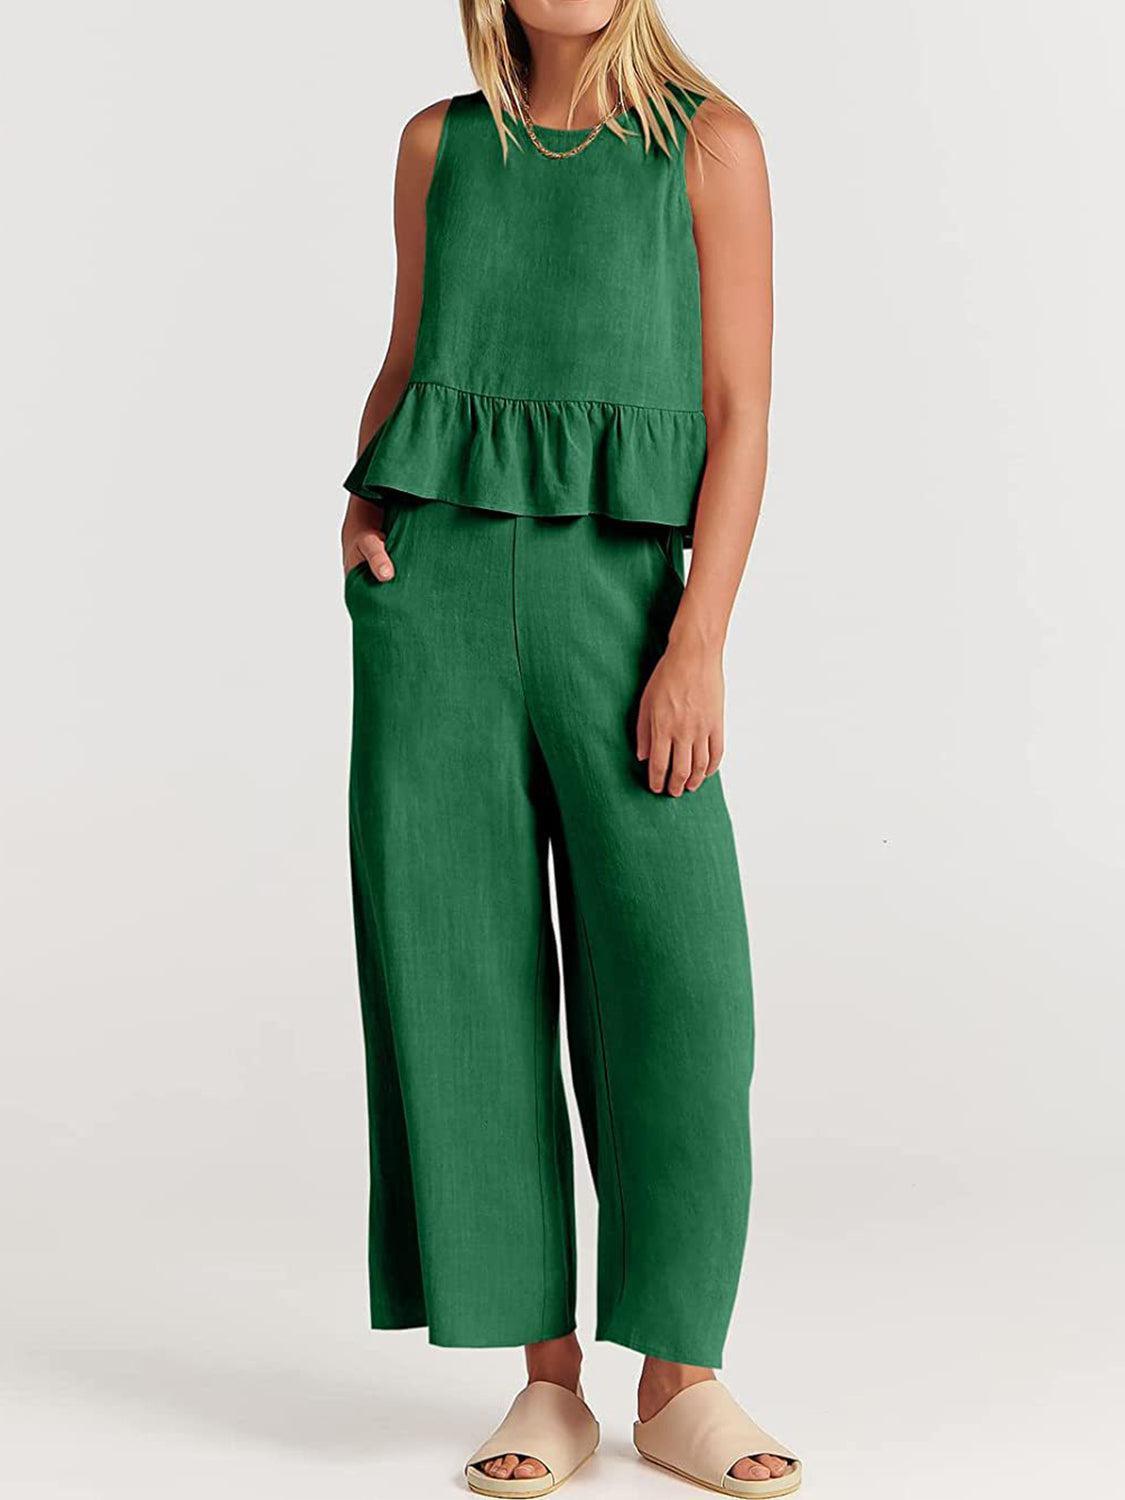 a woman in a green top and green pants